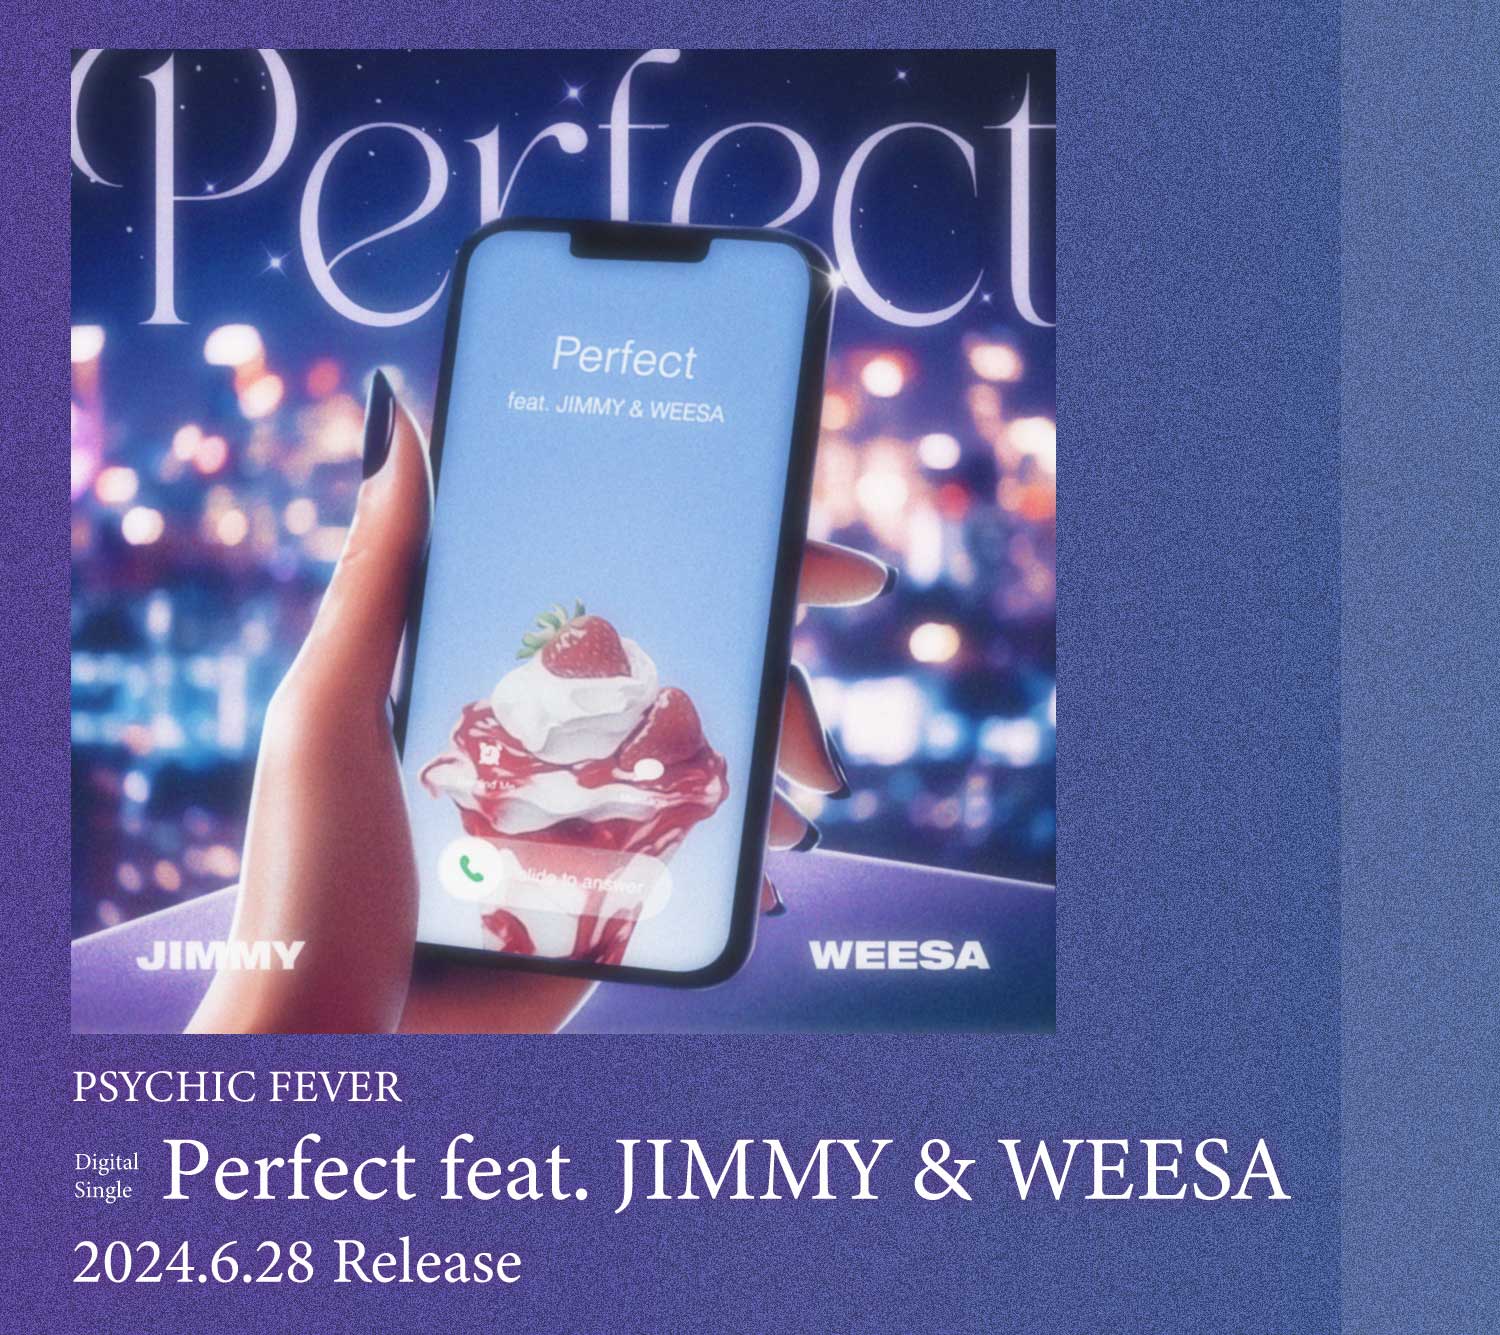 PSYCHIC FEVER『Perfect feat. JIMMY & WEESA』